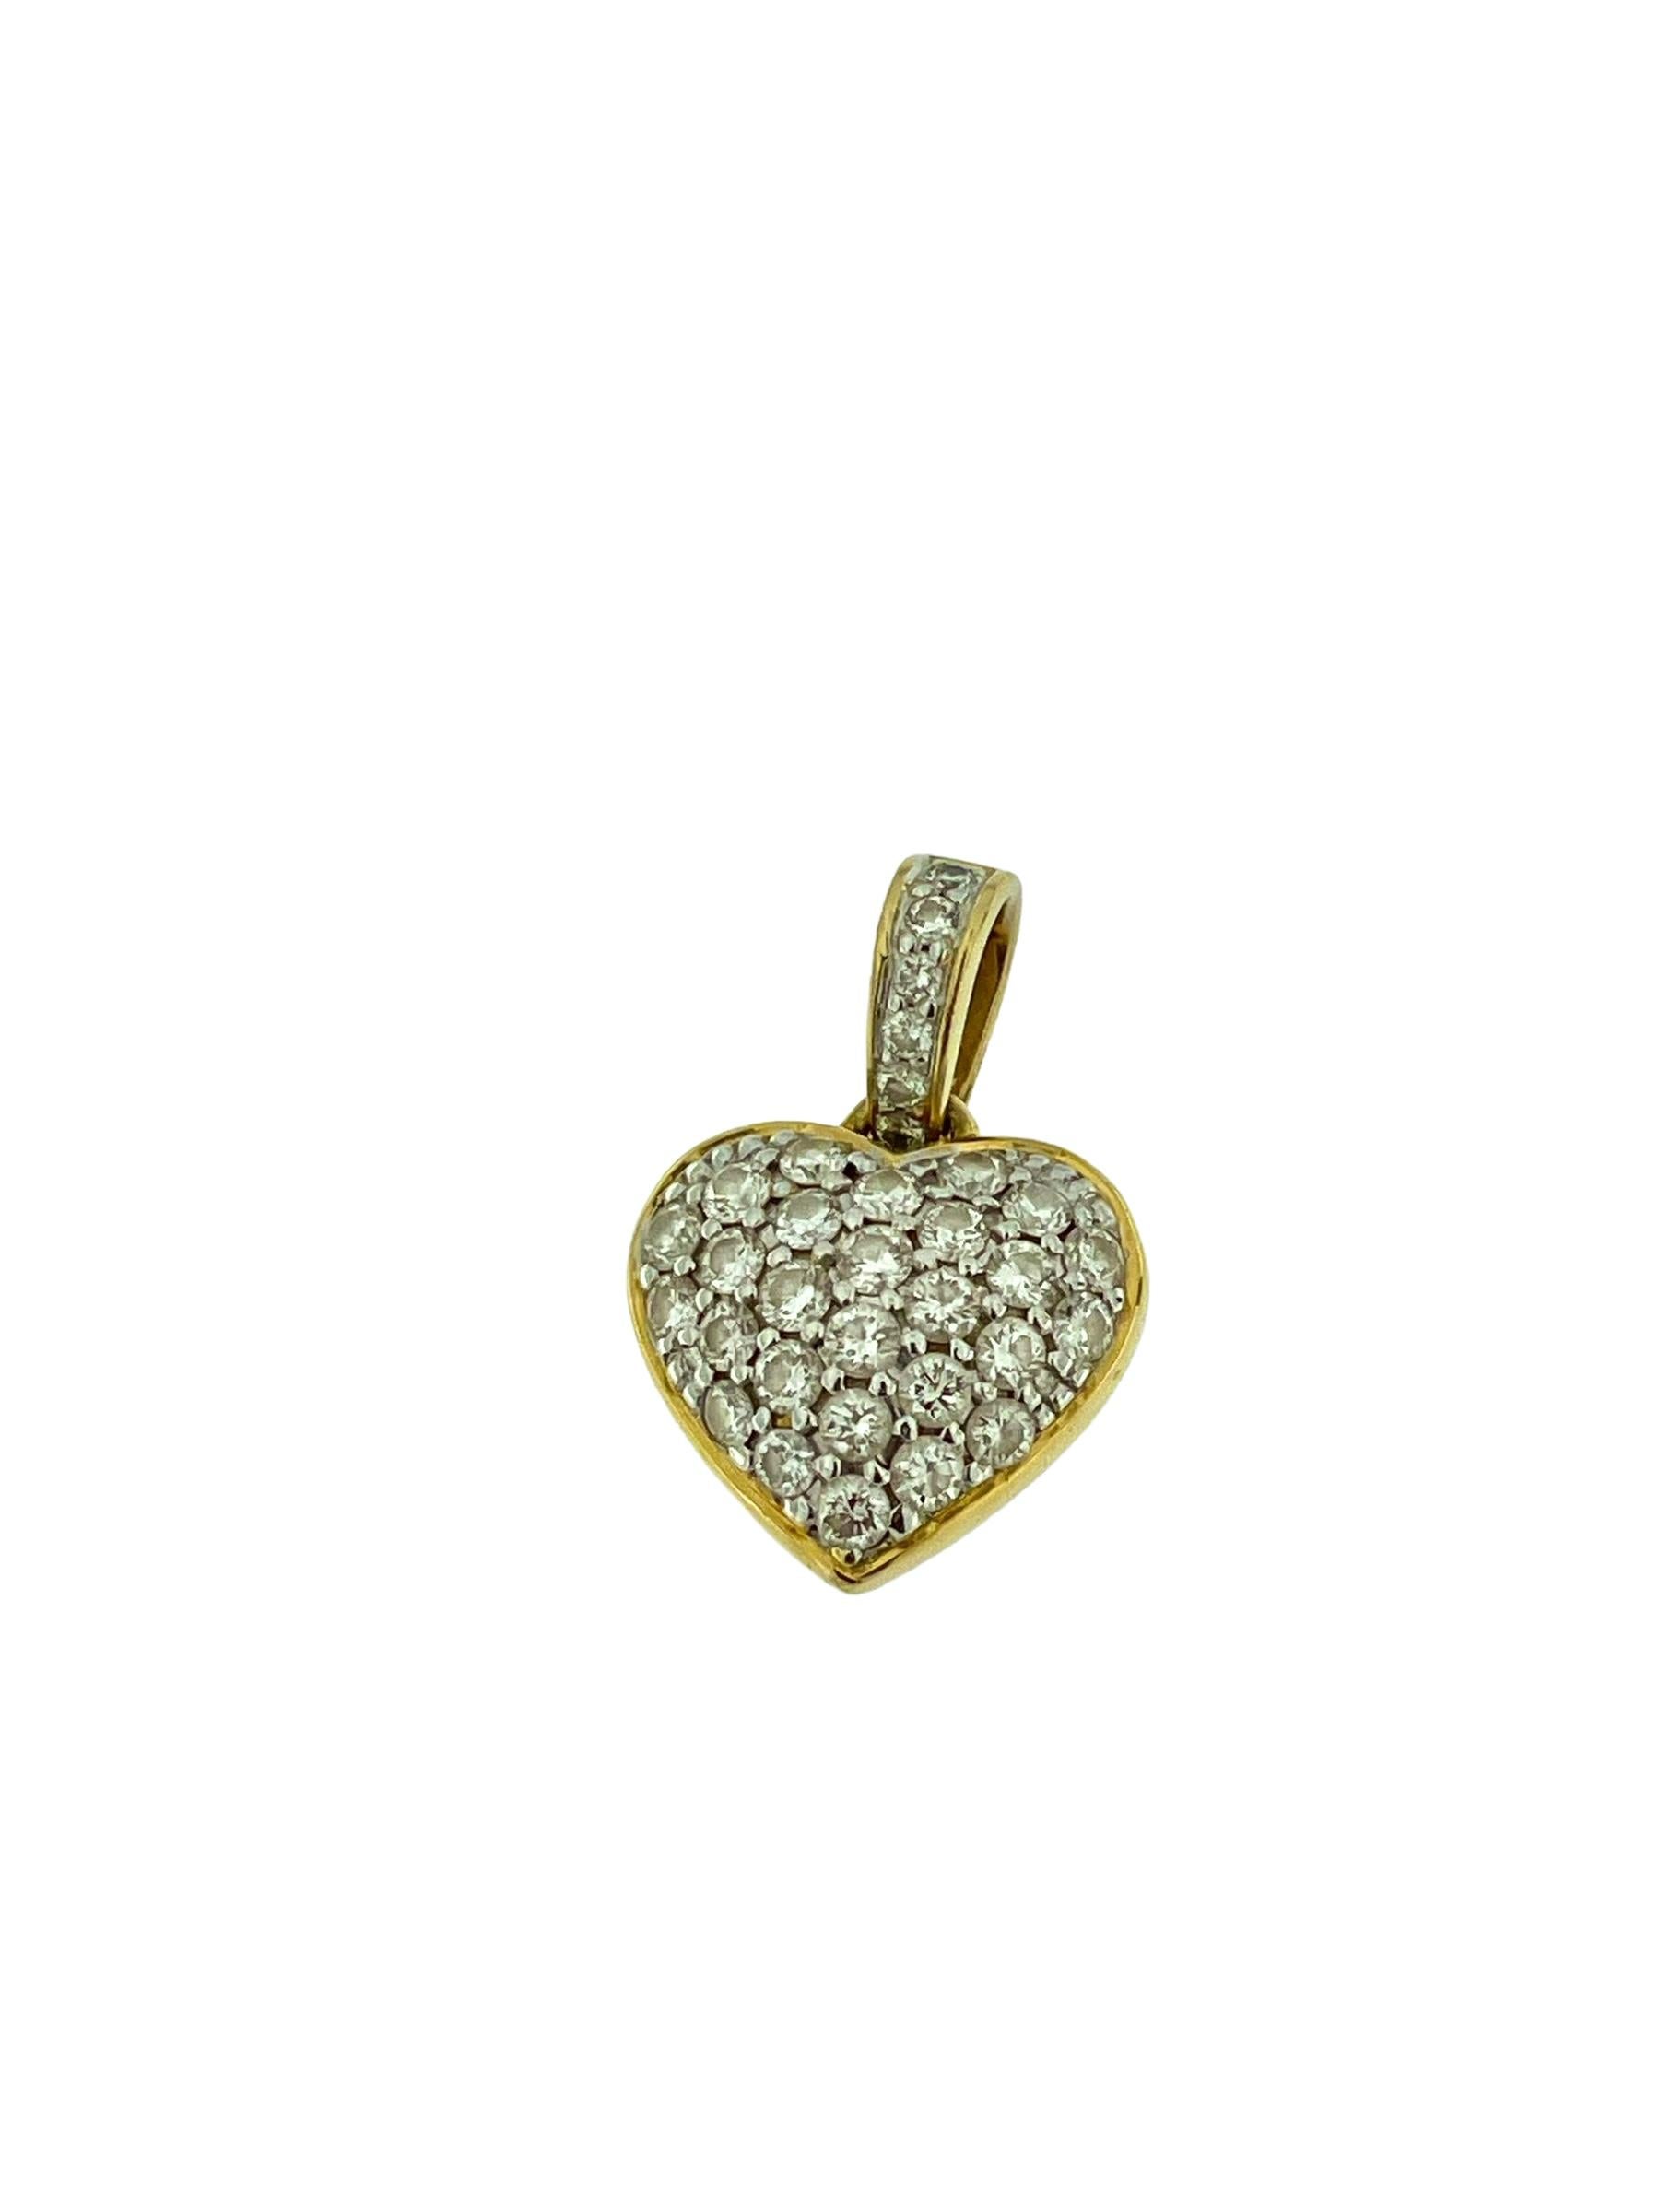 The Italian Diamonds Heart Pendant in 18-karat Yellow and White Gold is a stunning symbol of love and elegance. Crafted with precision and artistry, this pendant features a heart-shaped design adorned with a total of 33 diamonds.

The diamonds,